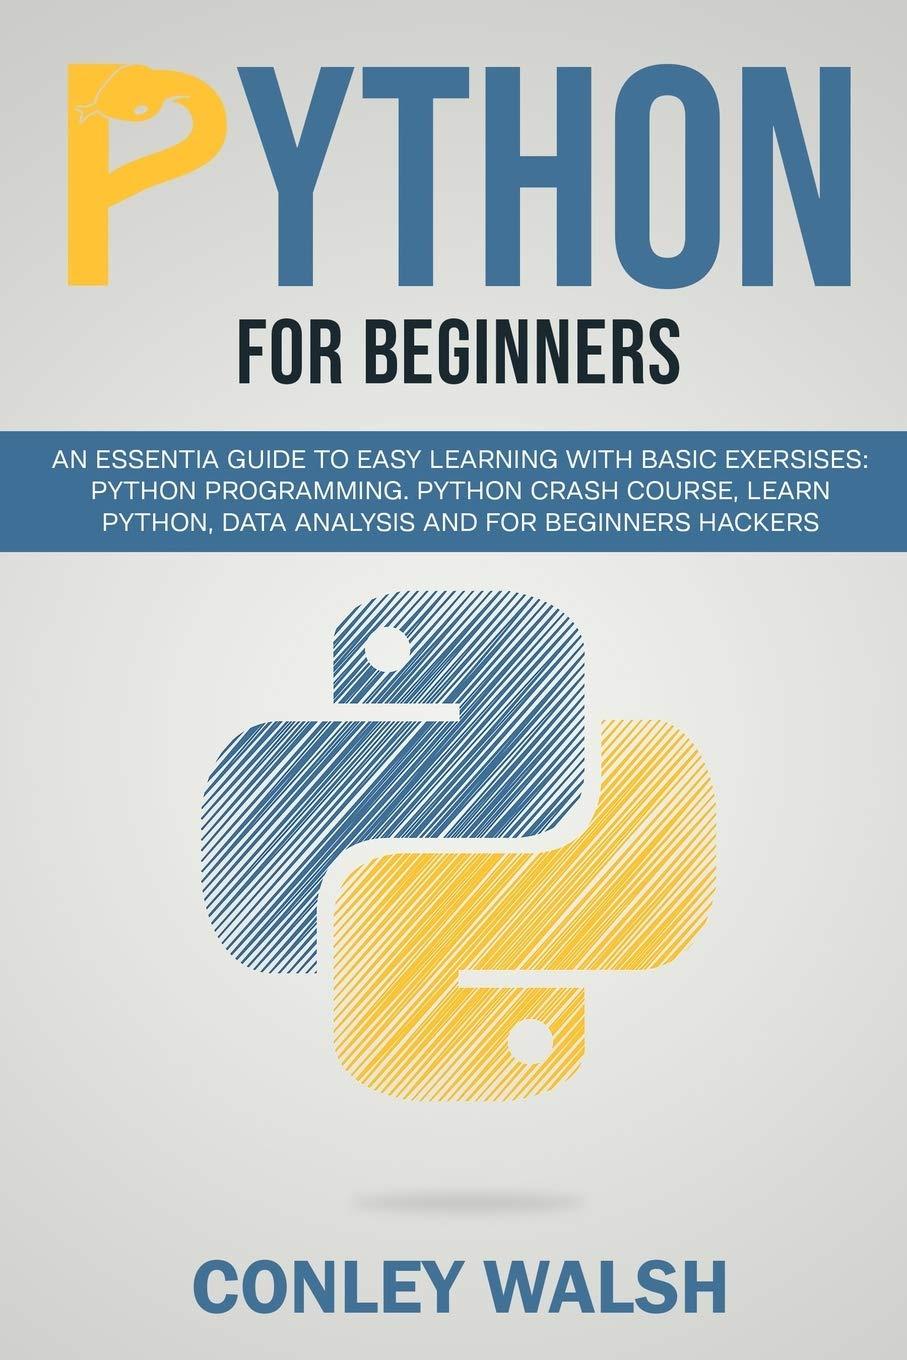 python for beginners an essential guide to learn with basic exercises python programming crash course for